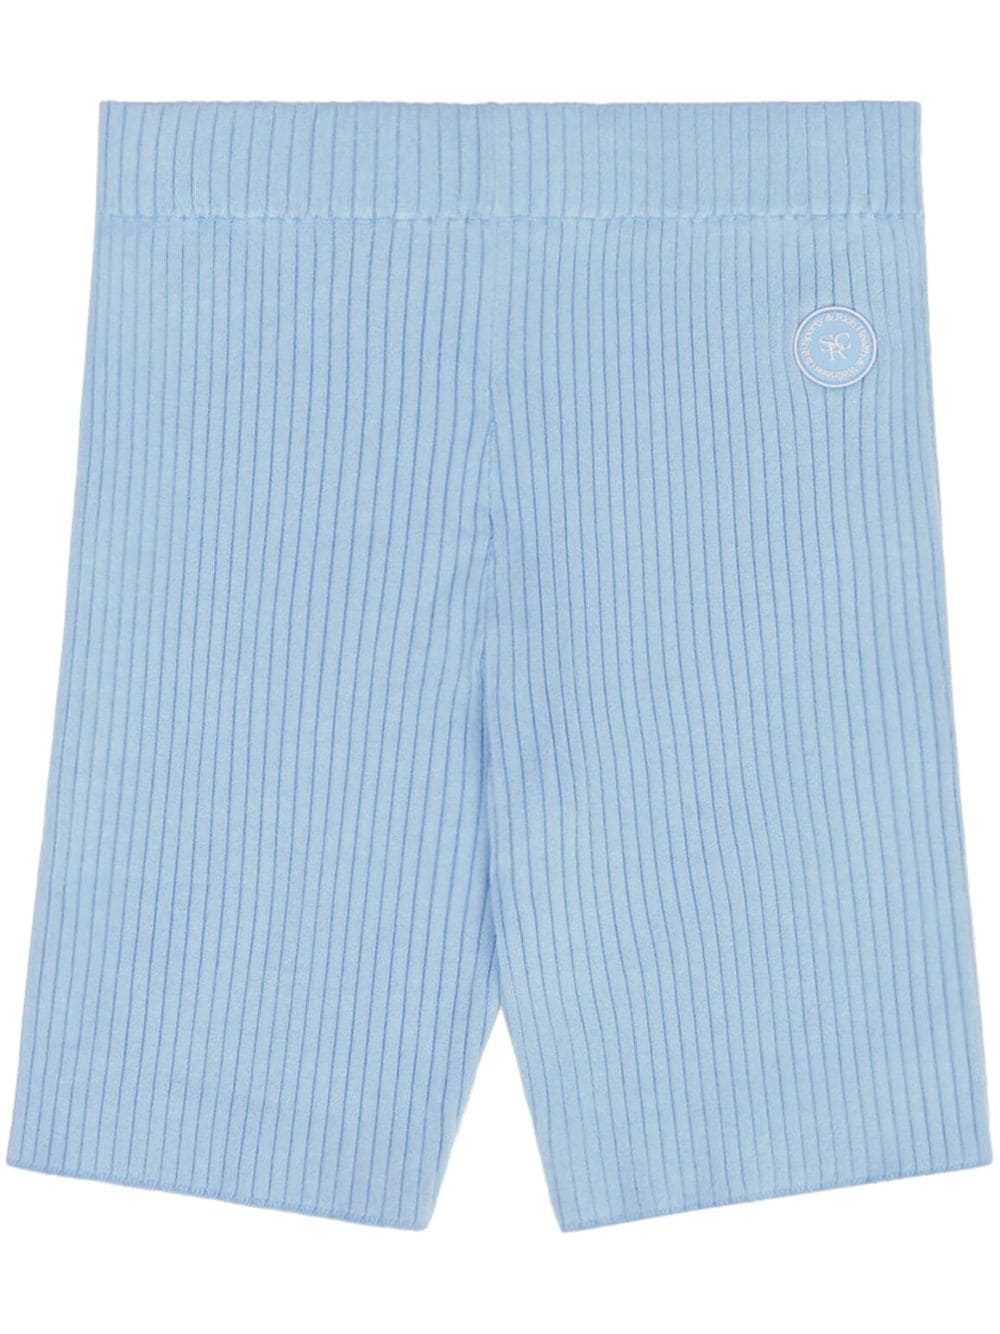 Sporty & Rich ribbed cycling shorts - Blue von Sporty & Rich